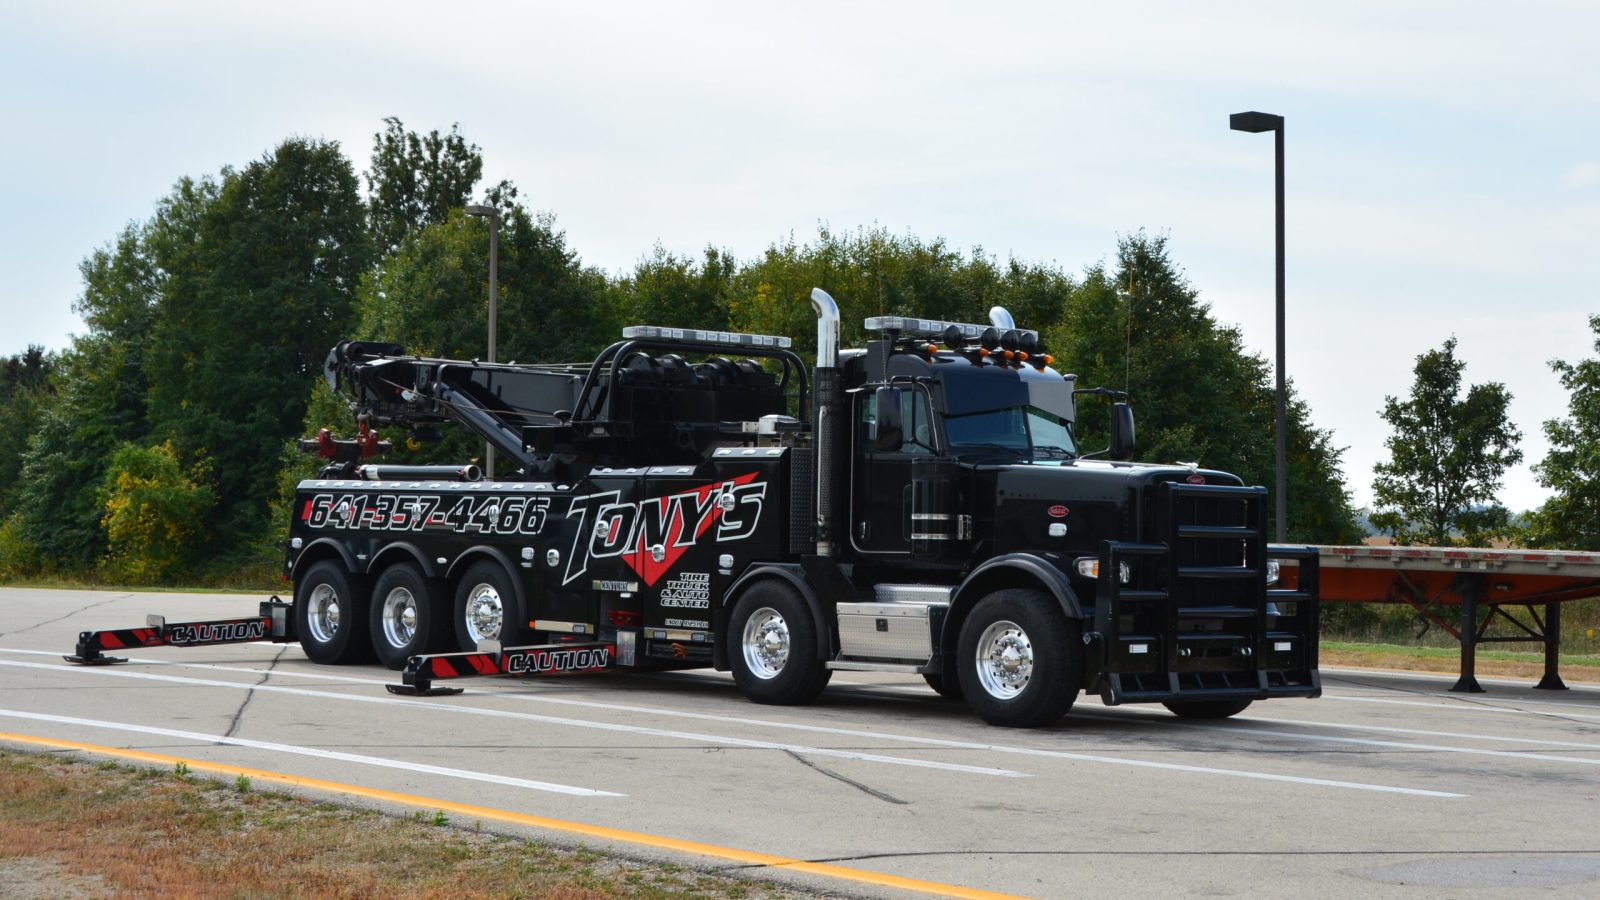 A Tony's heavy-duty wrecker, ready for action in providing reliable towing services.